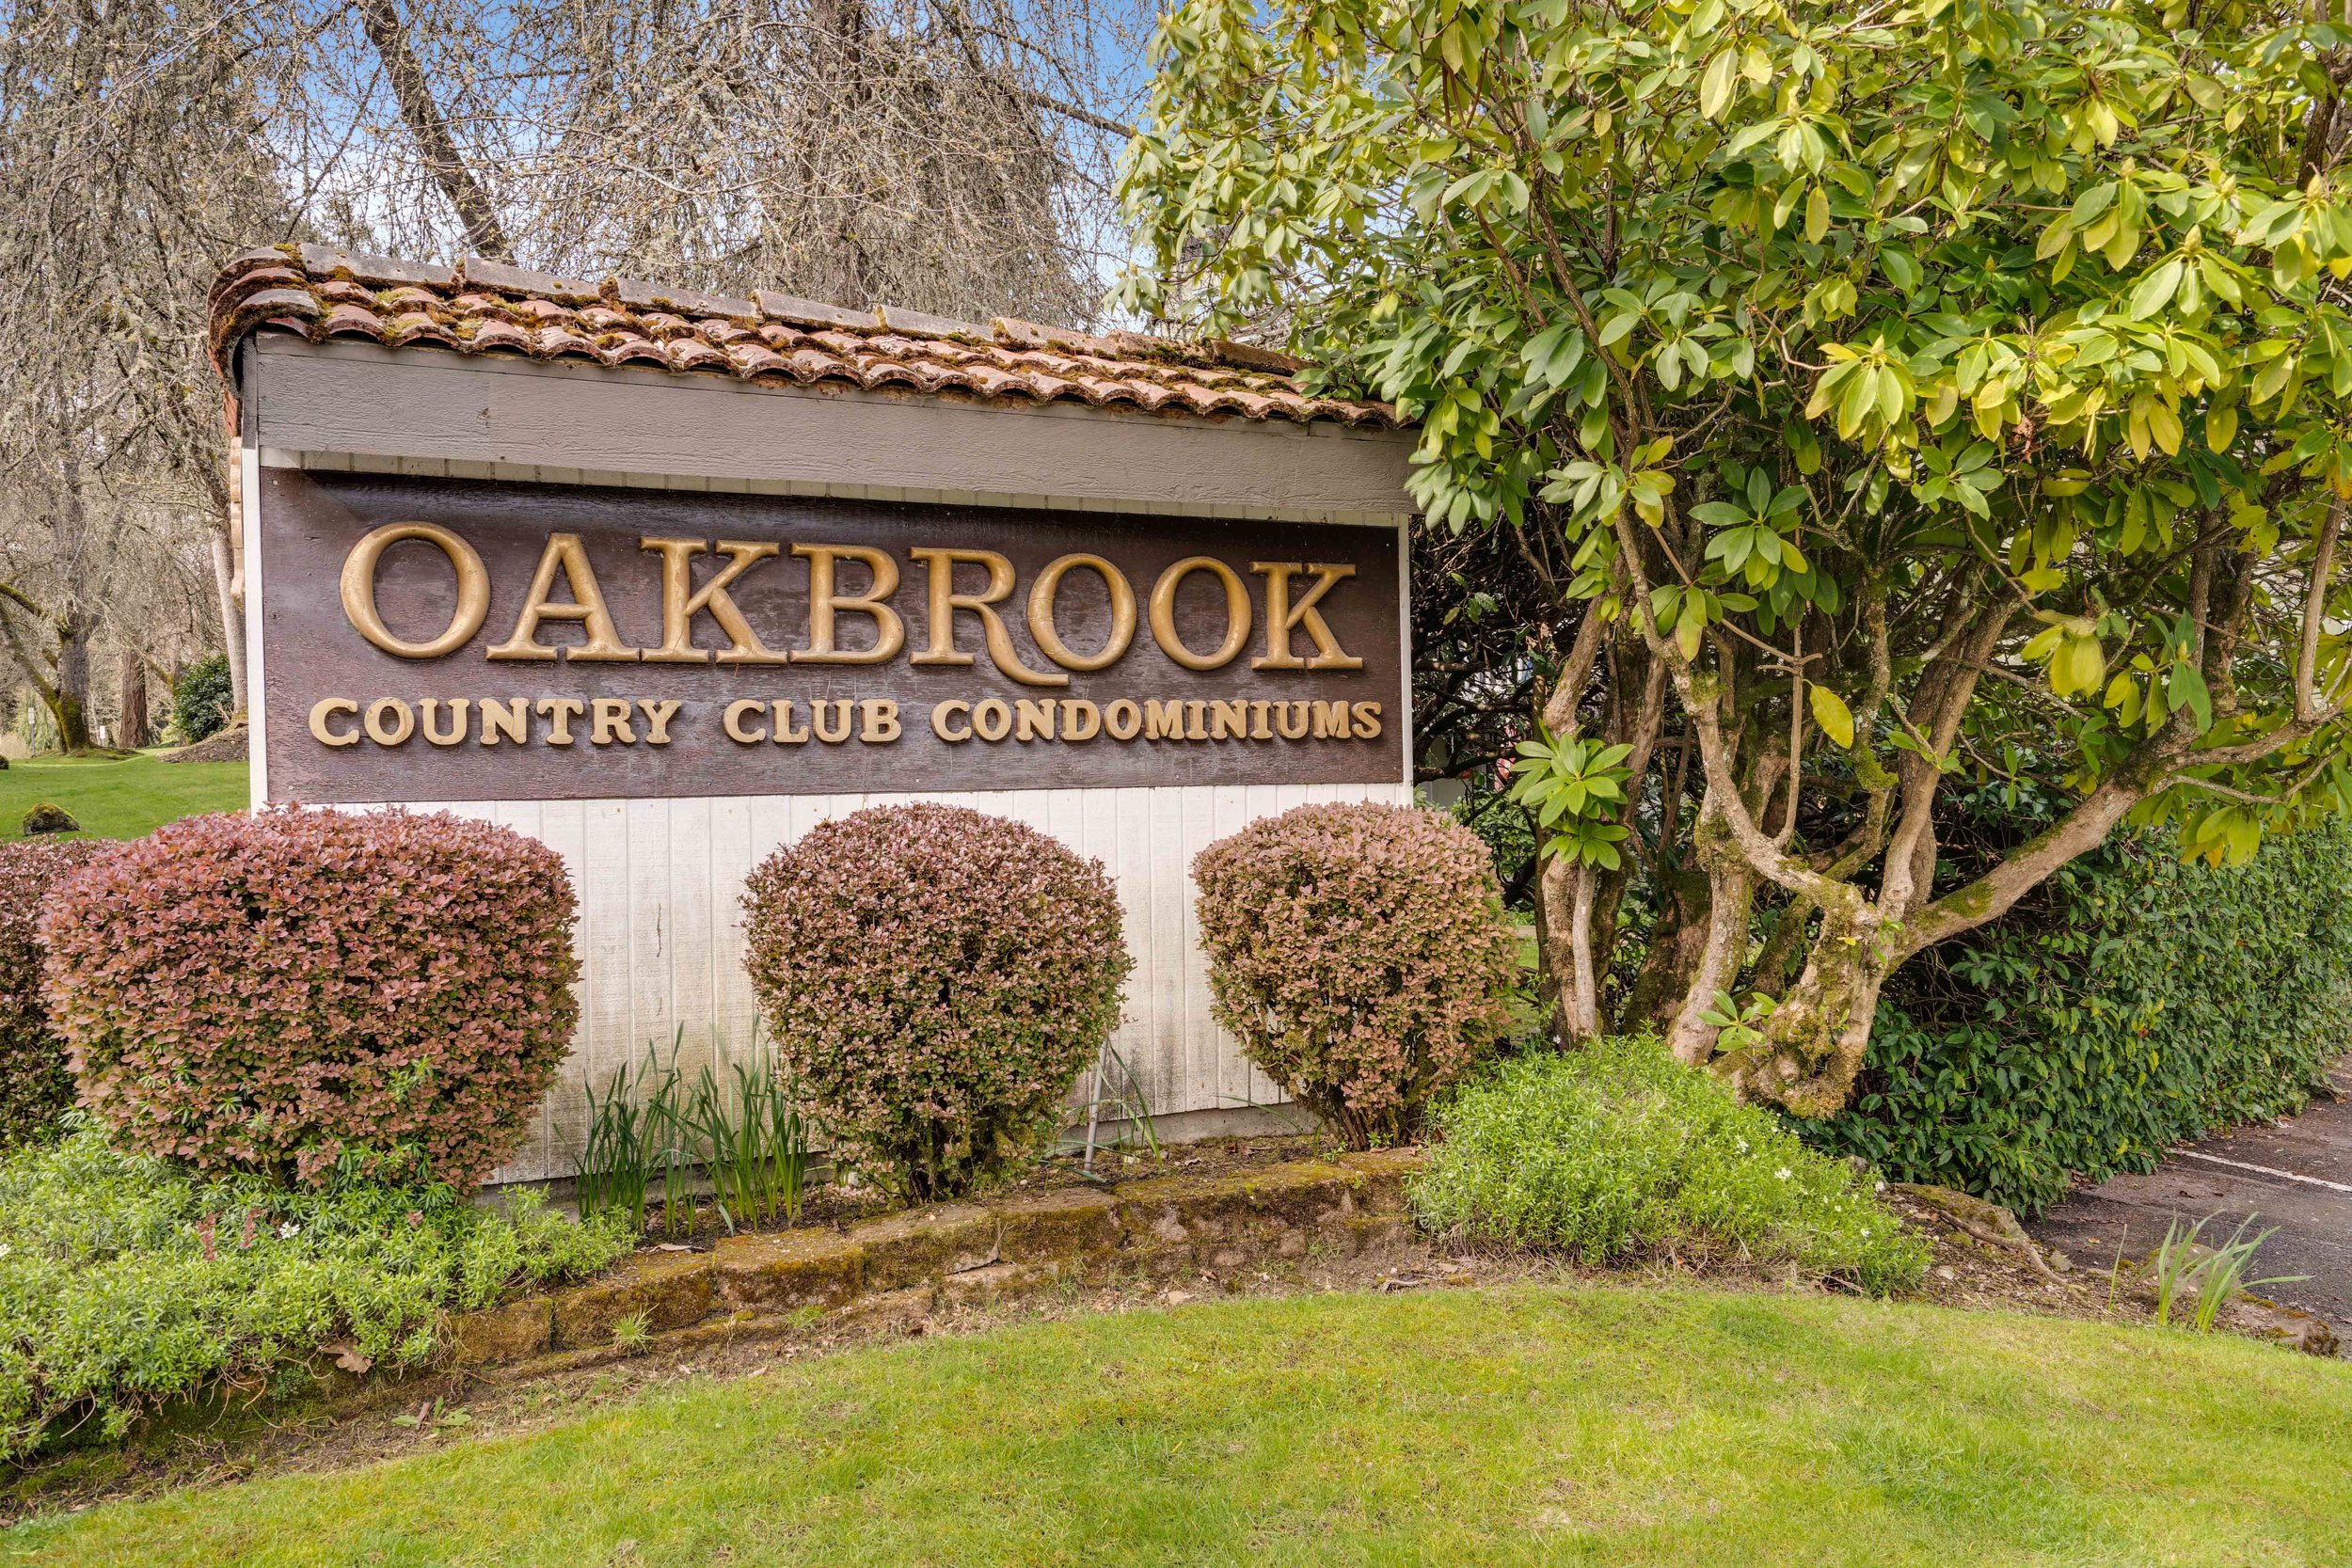 Oakbrook Country Club Condominums Entrance.jpg